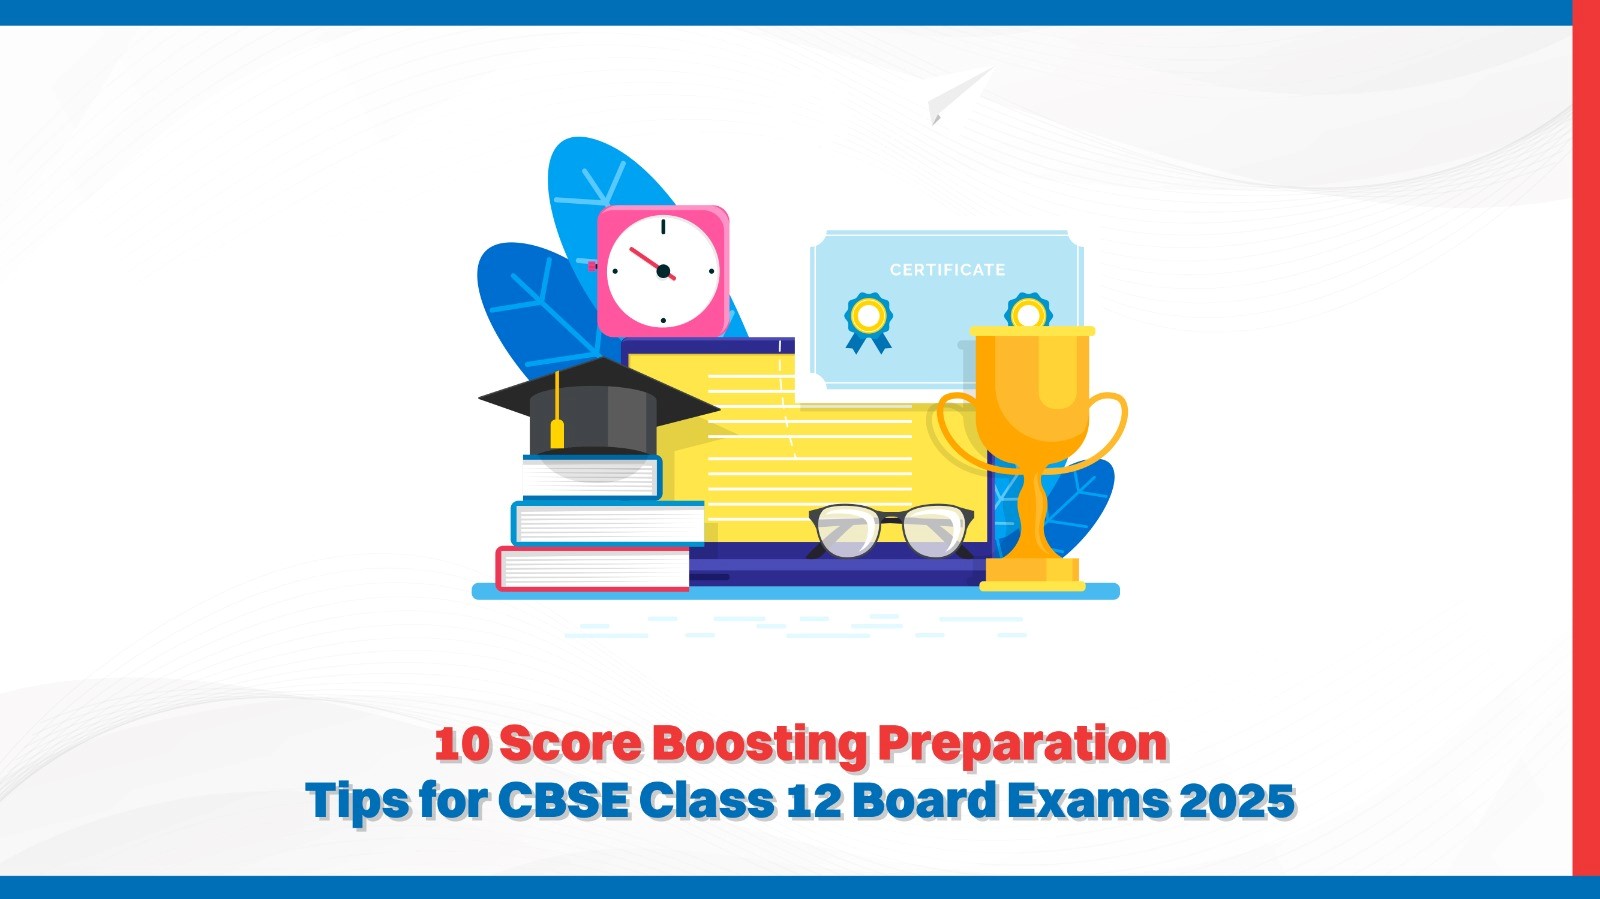 10 Score Boosting Preparation Tips for CBSE Class 12 Board Exams 2025.jpg